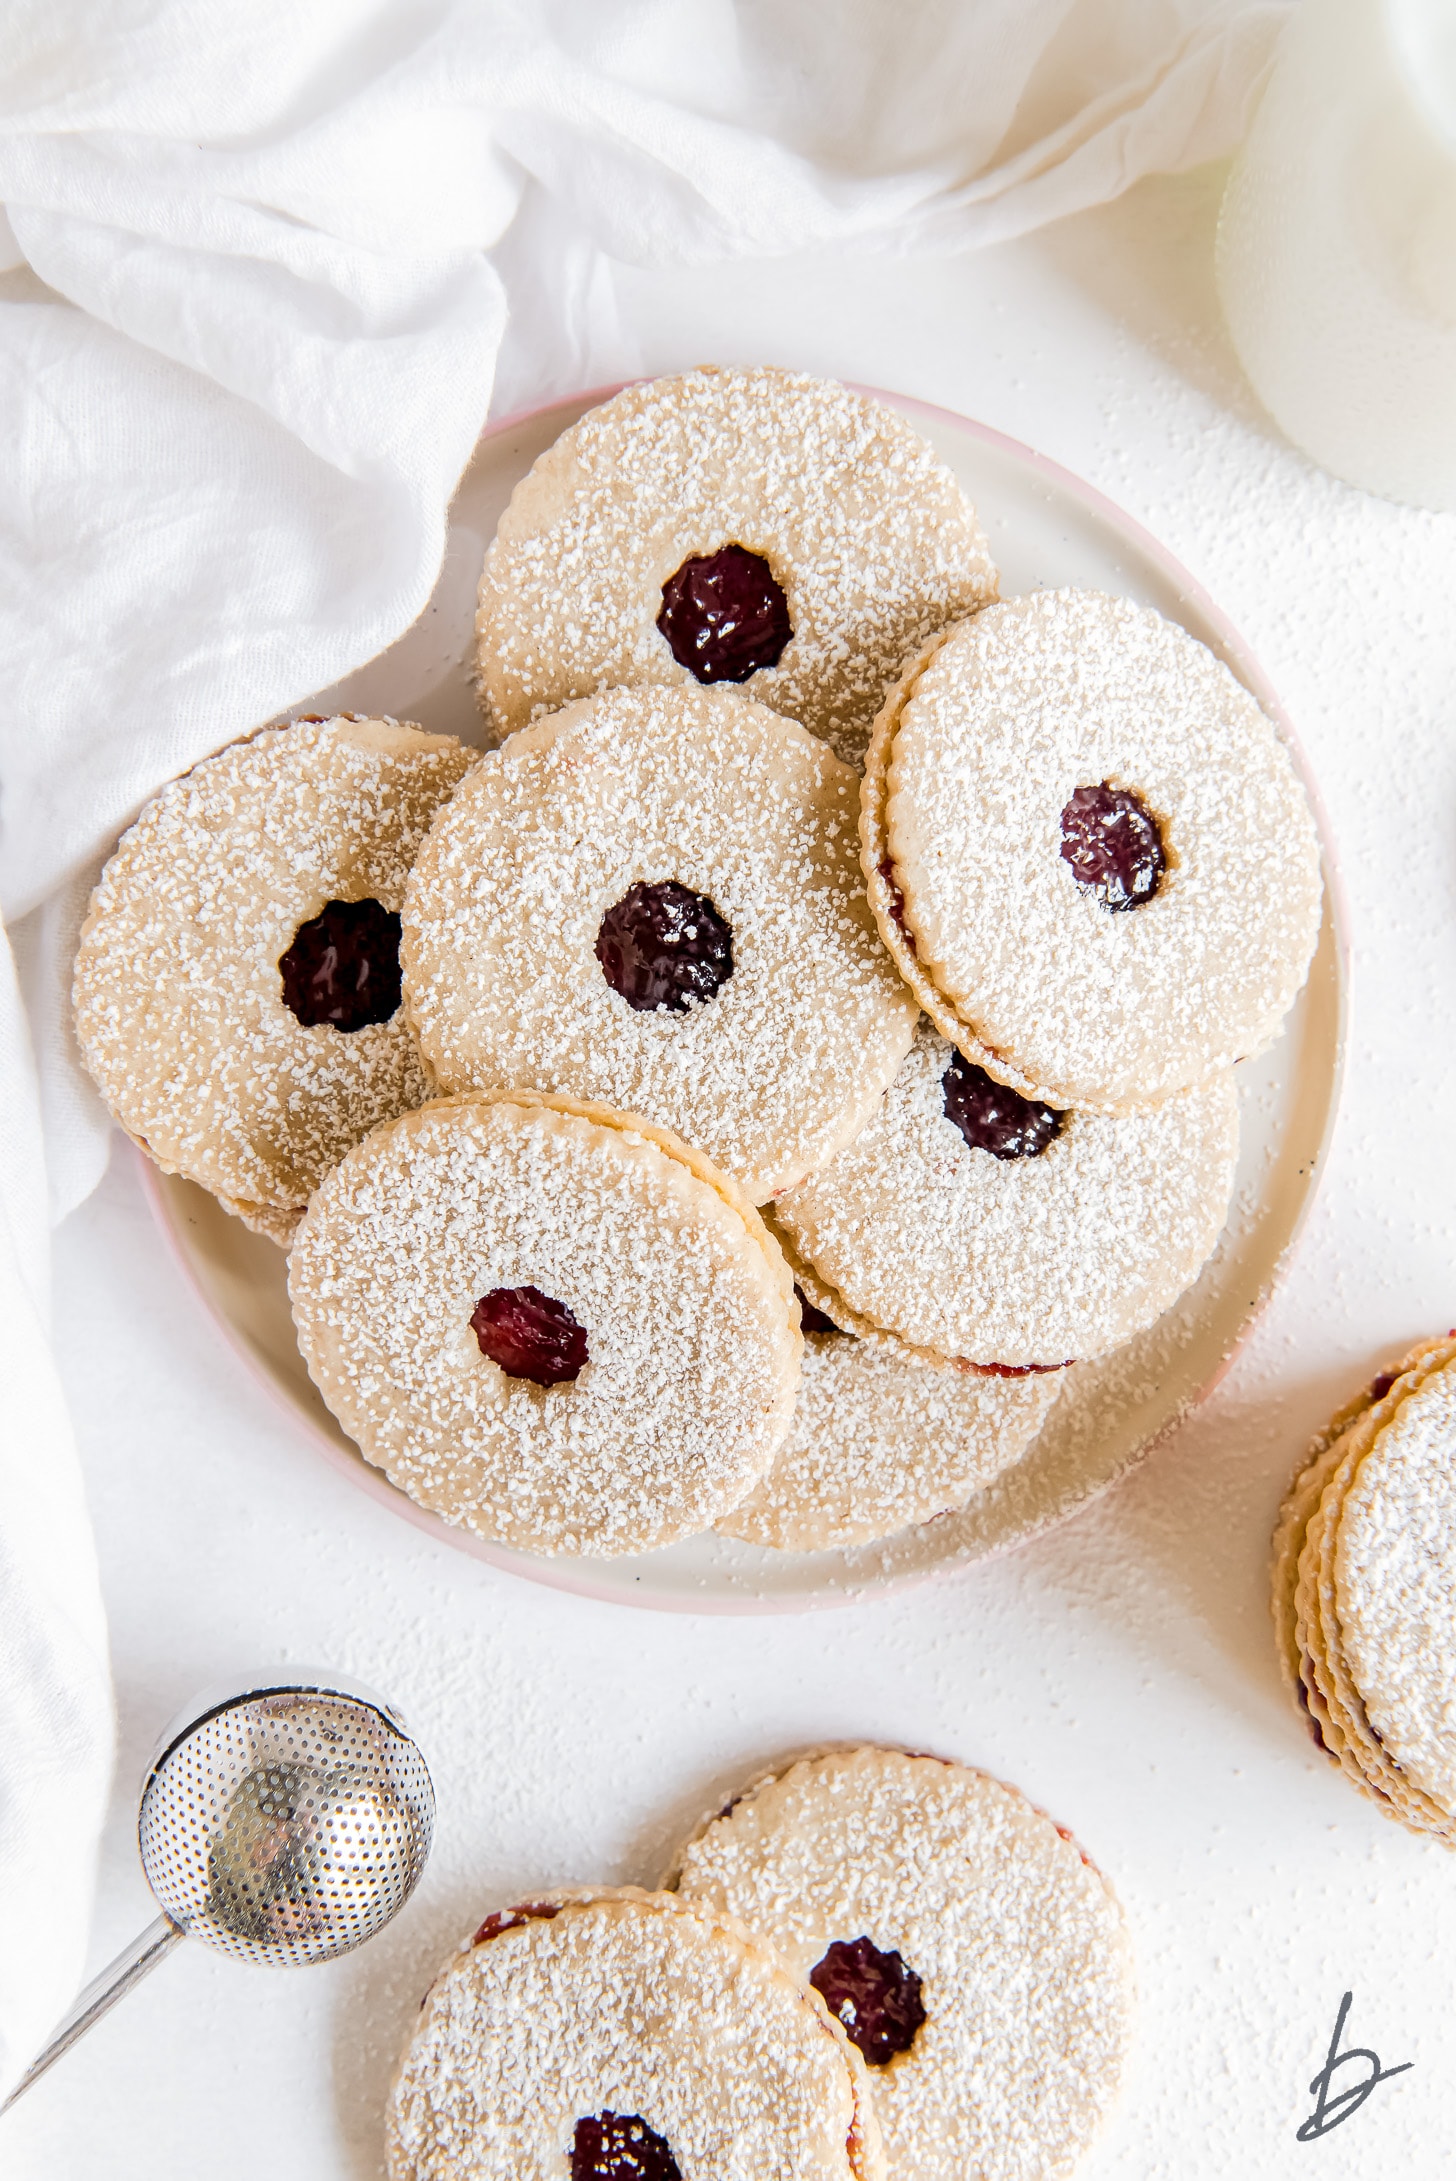 Linzer cookies with heart cut-out and jam. Plate with hands serving plate of cookies